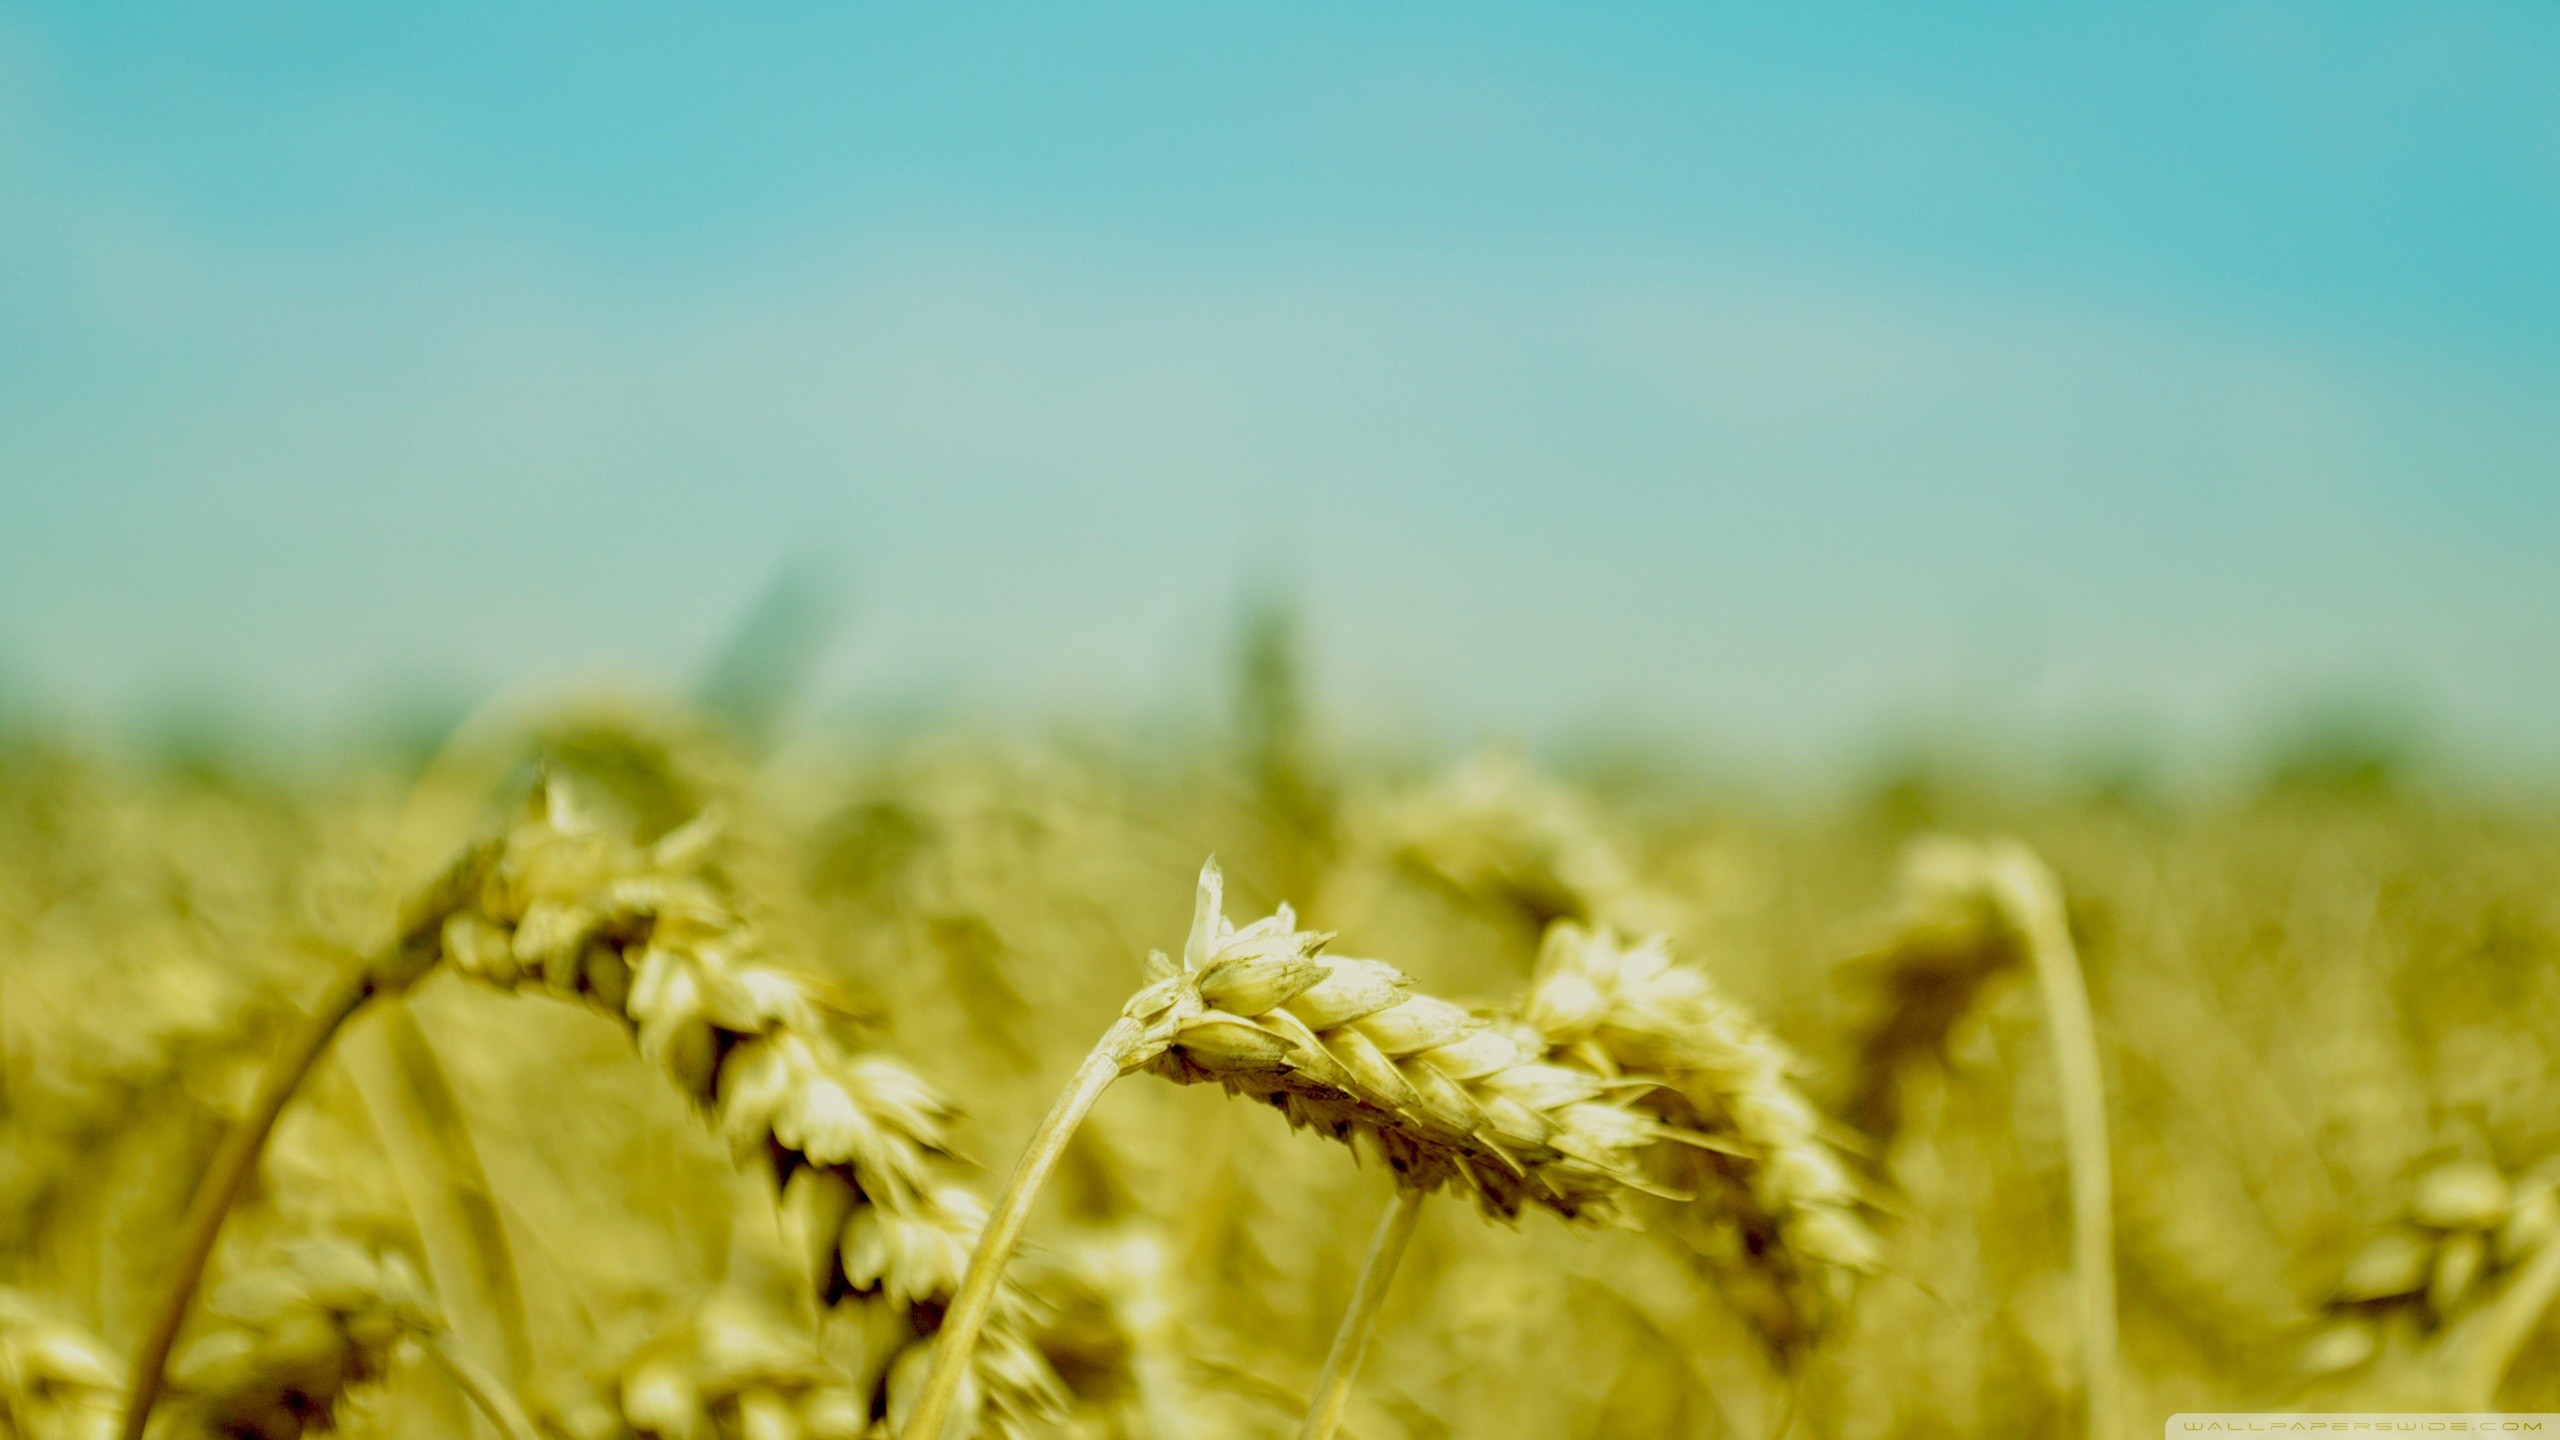 General 2560x1440 spikelets wheat plants